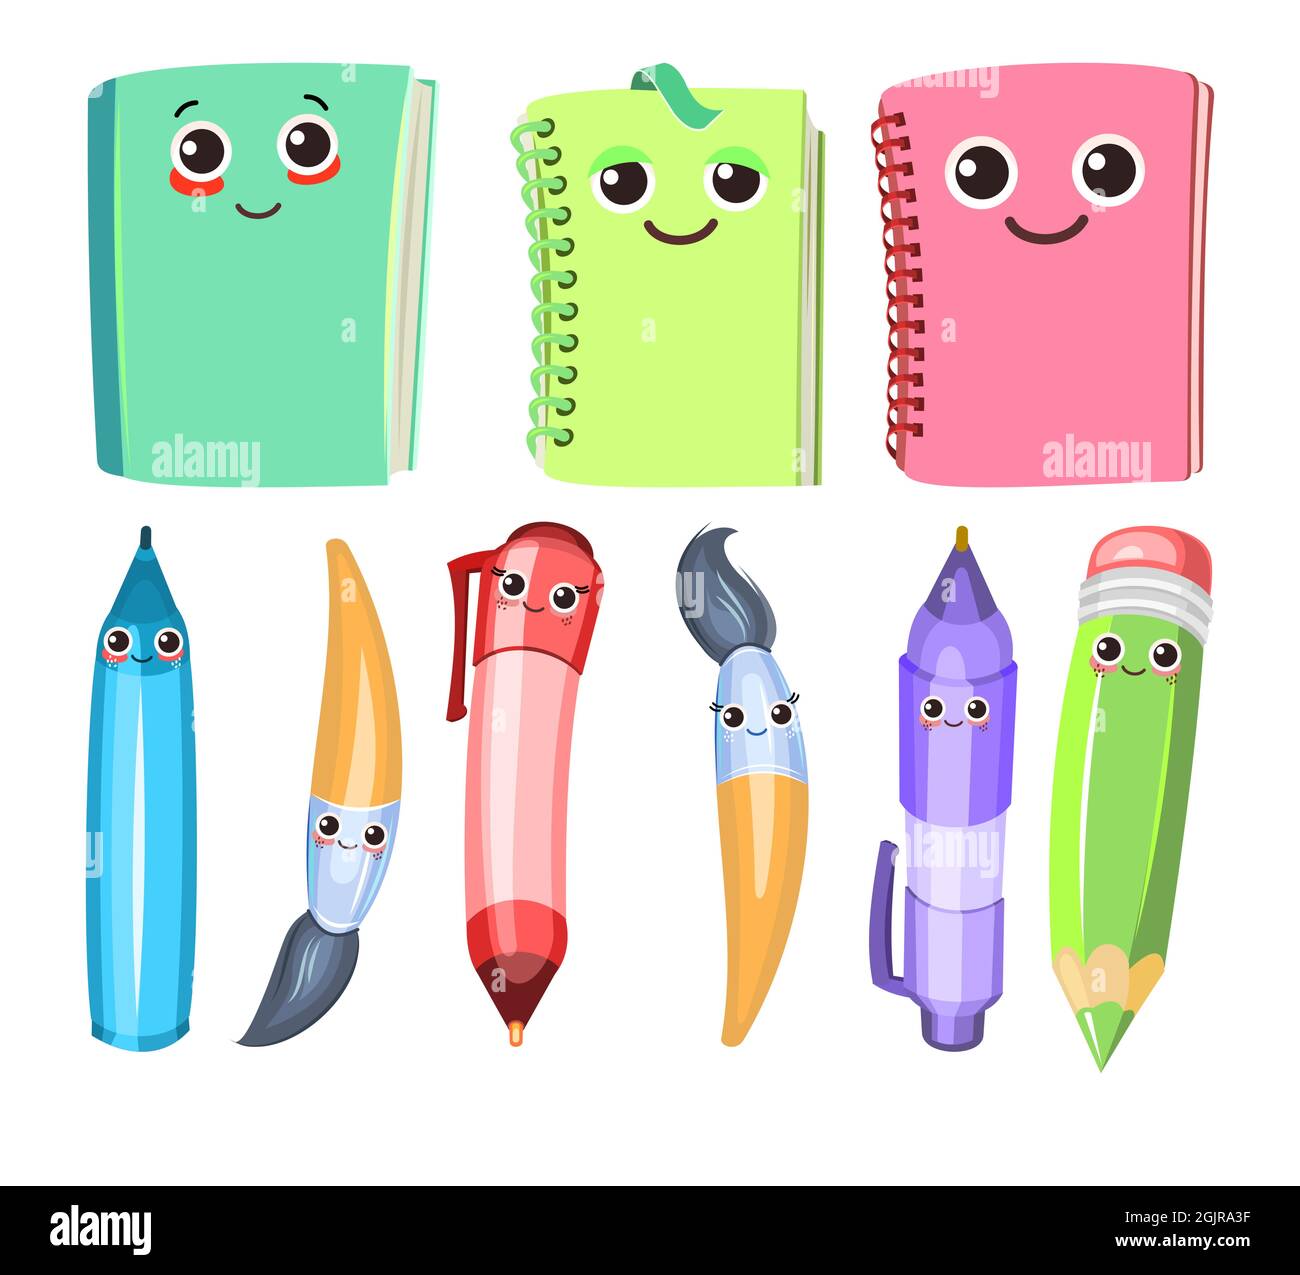 https://c8.alamy.com/comp/2GJRA3F/stationery-objects-set-isolated-on-white-background-cartoon-style-brushes-and-pencils-markers-and-ballpoint-pens-cheerful-characters-with-a-face-2GJRA3F.jpg